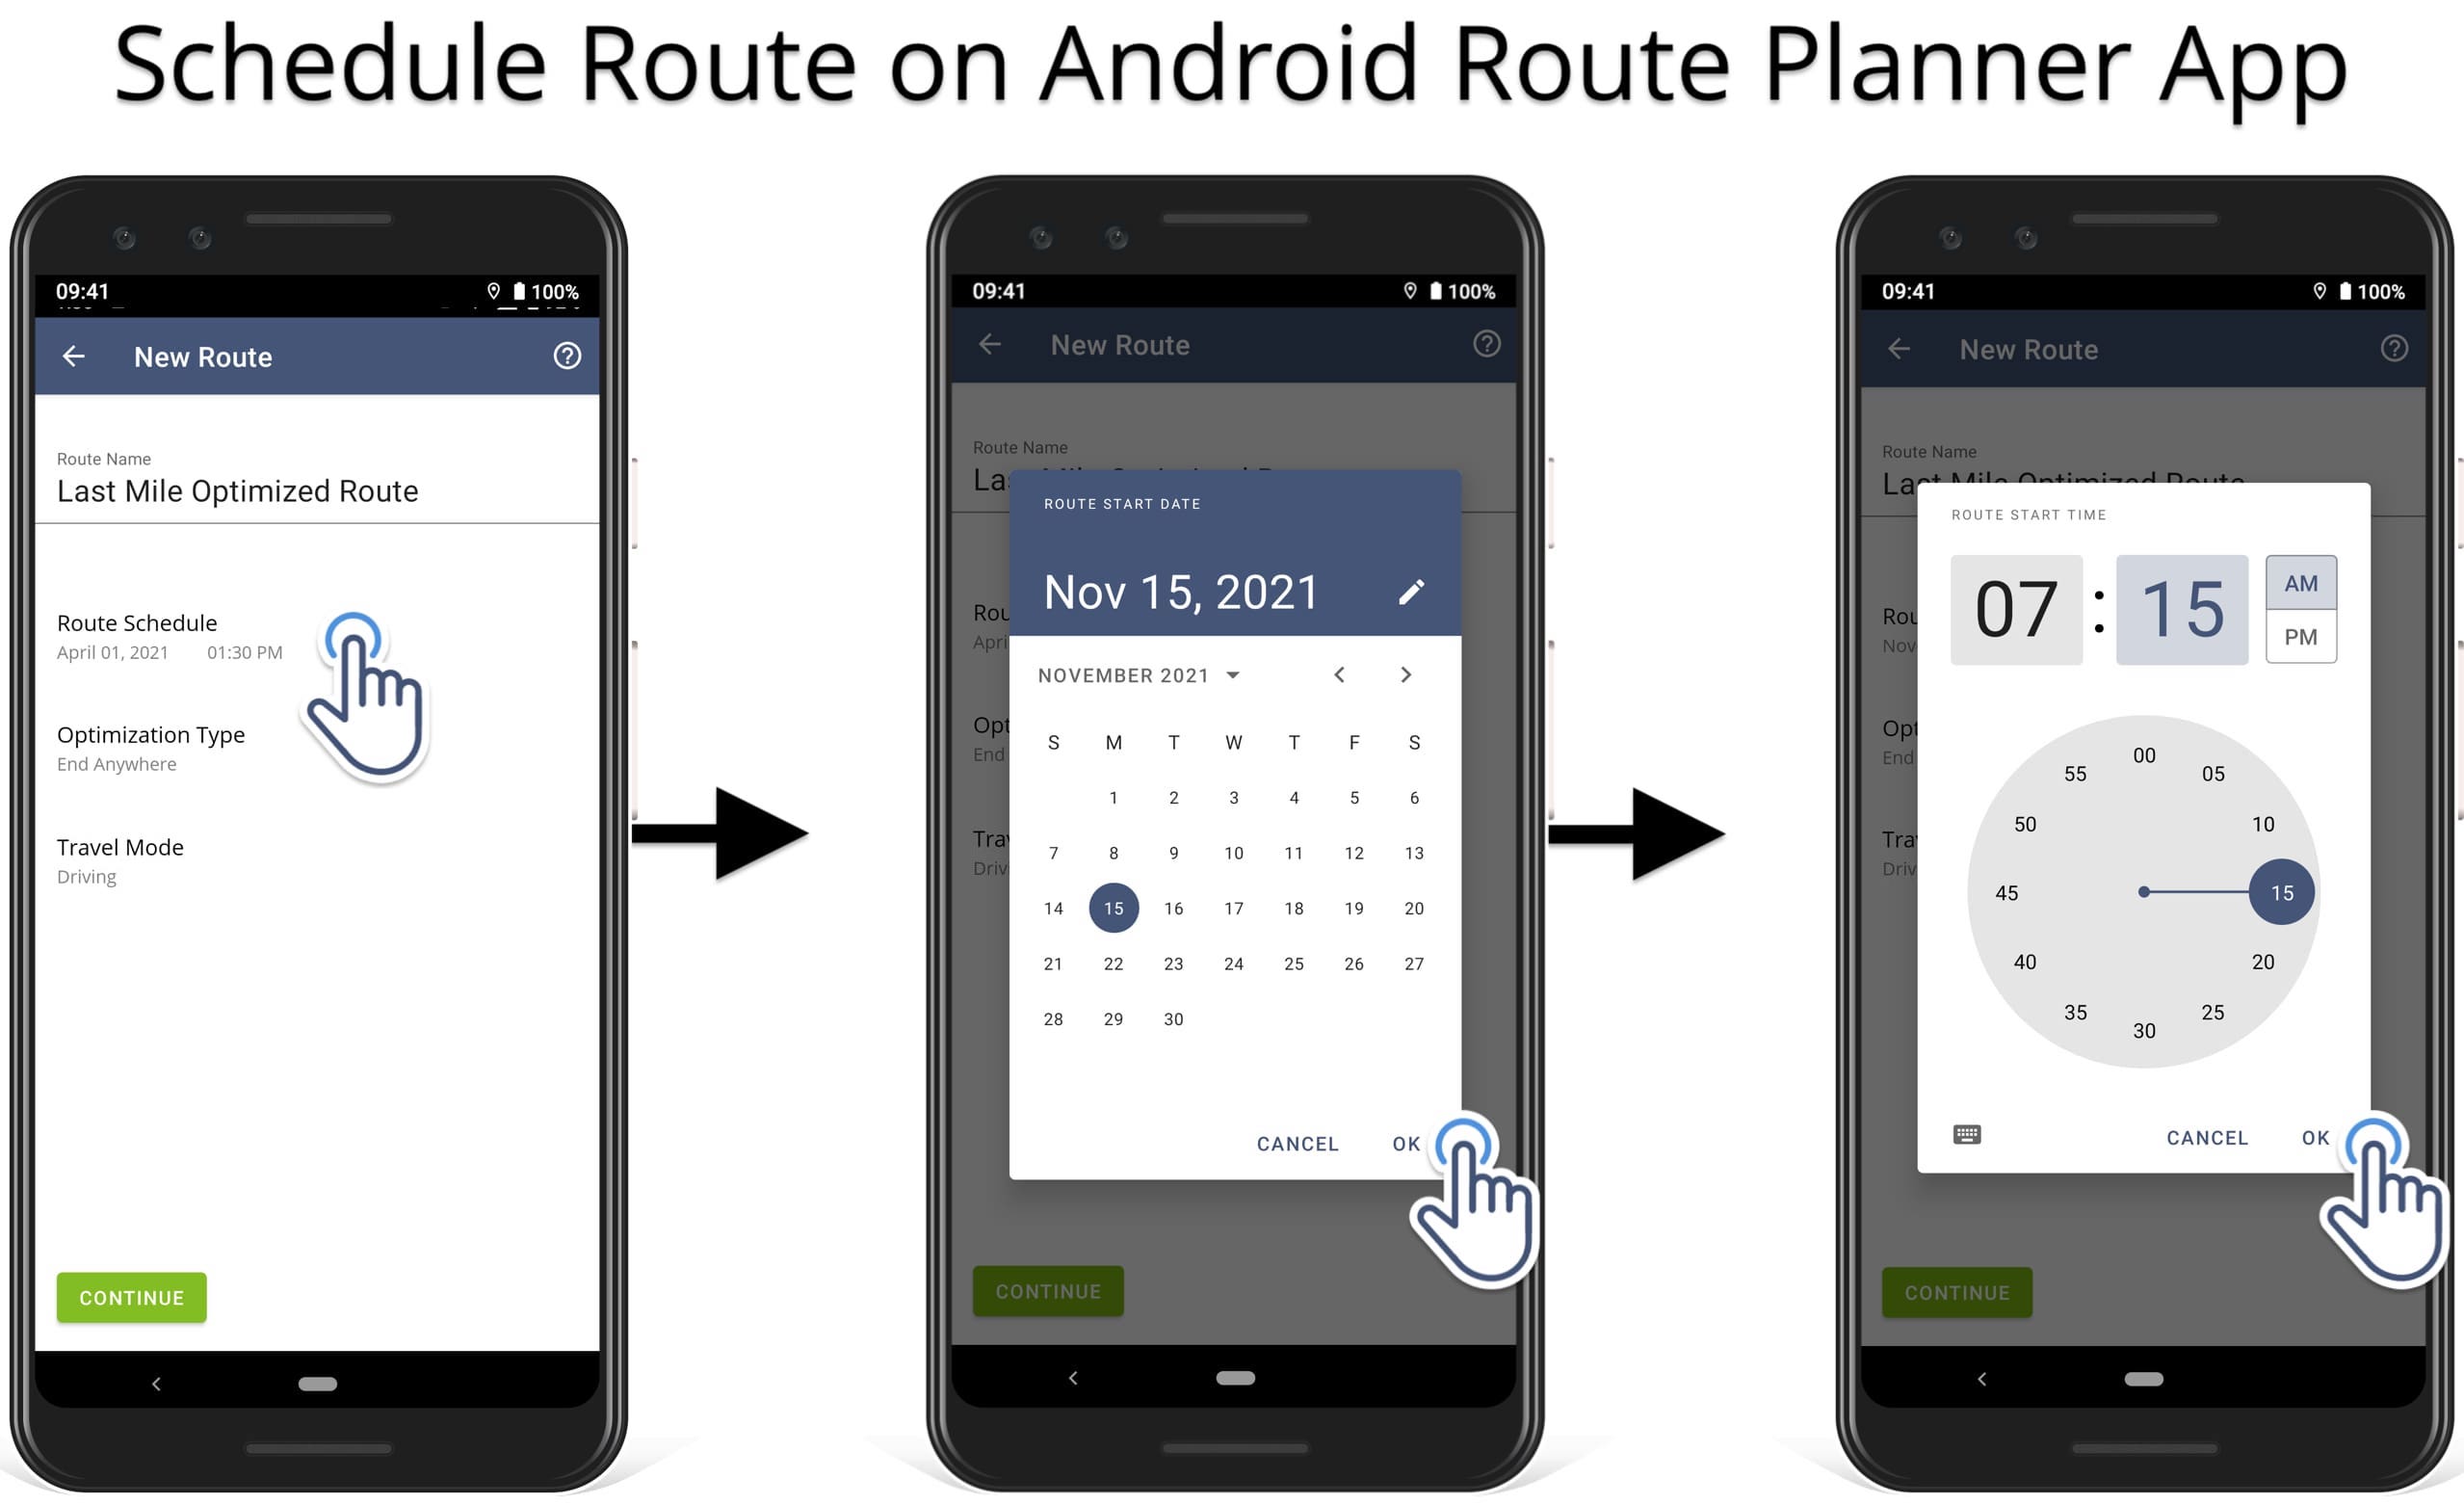 Schedule route on the Route4Me Android route planner app